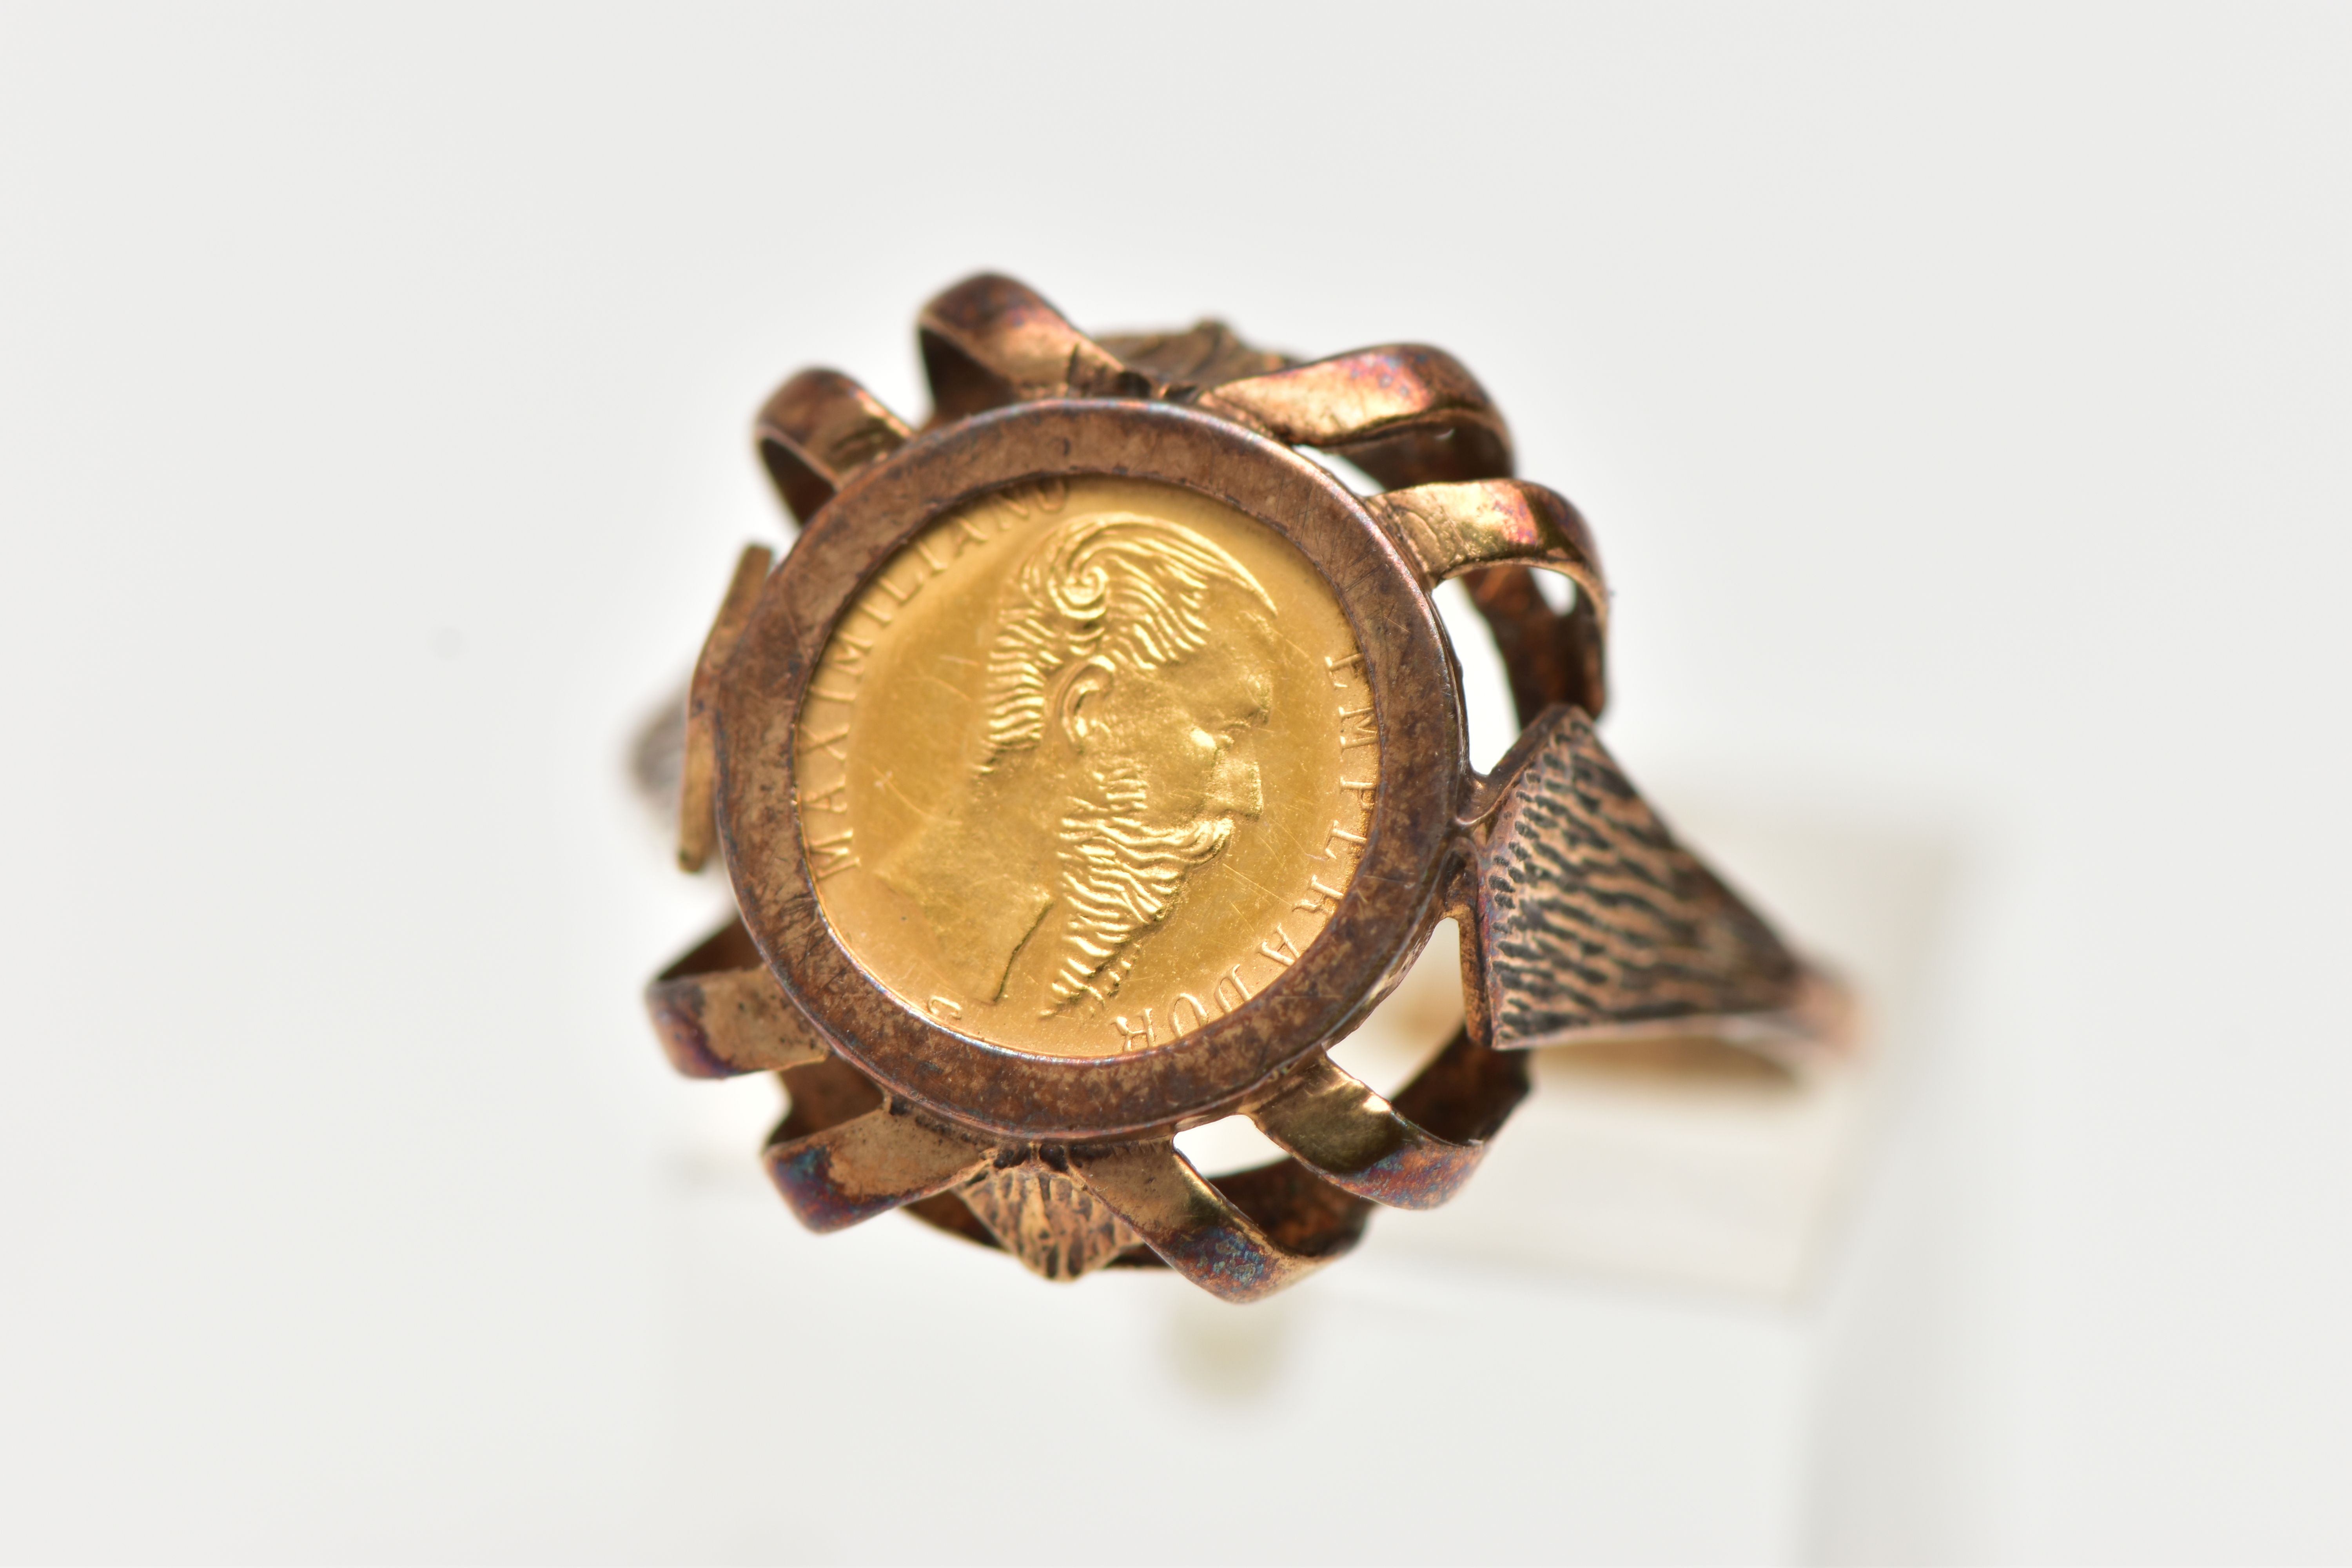 A 9CT YELLOW GOLD COIN RING WITH MEXICAN COIN, the ring set with a Mexican Maximiliano coin, dated